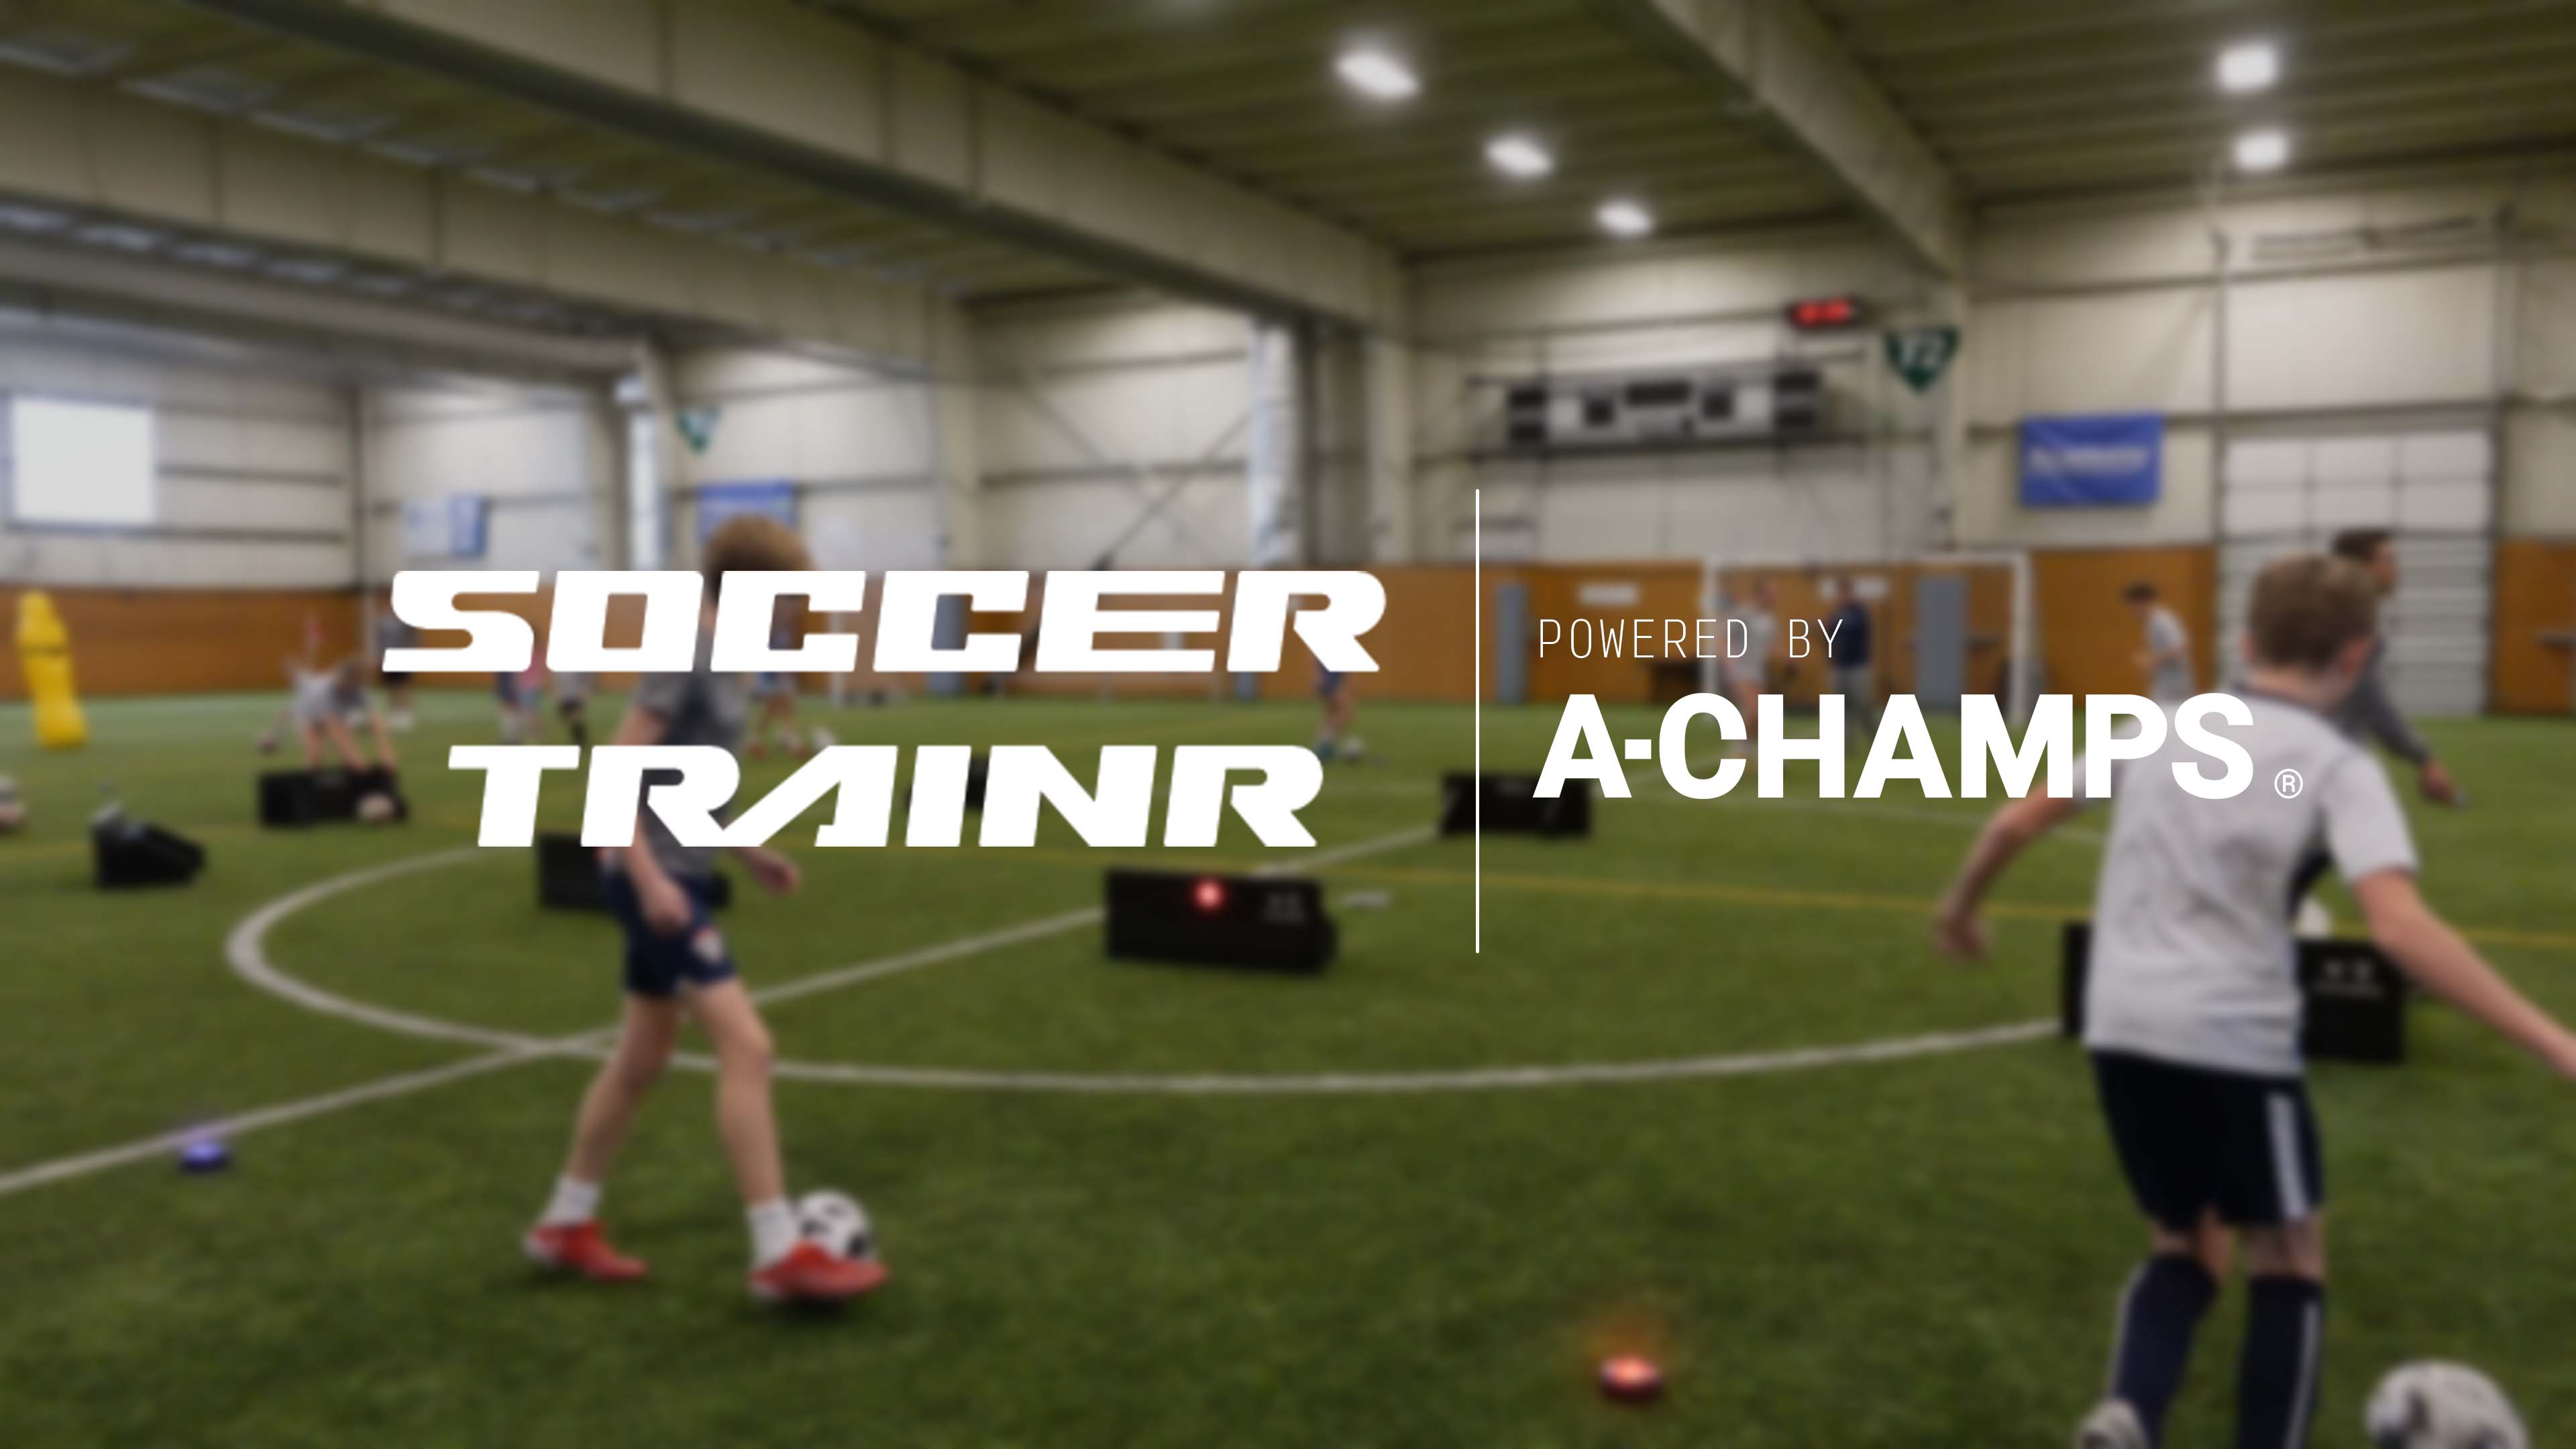 SOCCER TRAINR and A-Champs Partner to Develop Game-Realistic Soccer Training